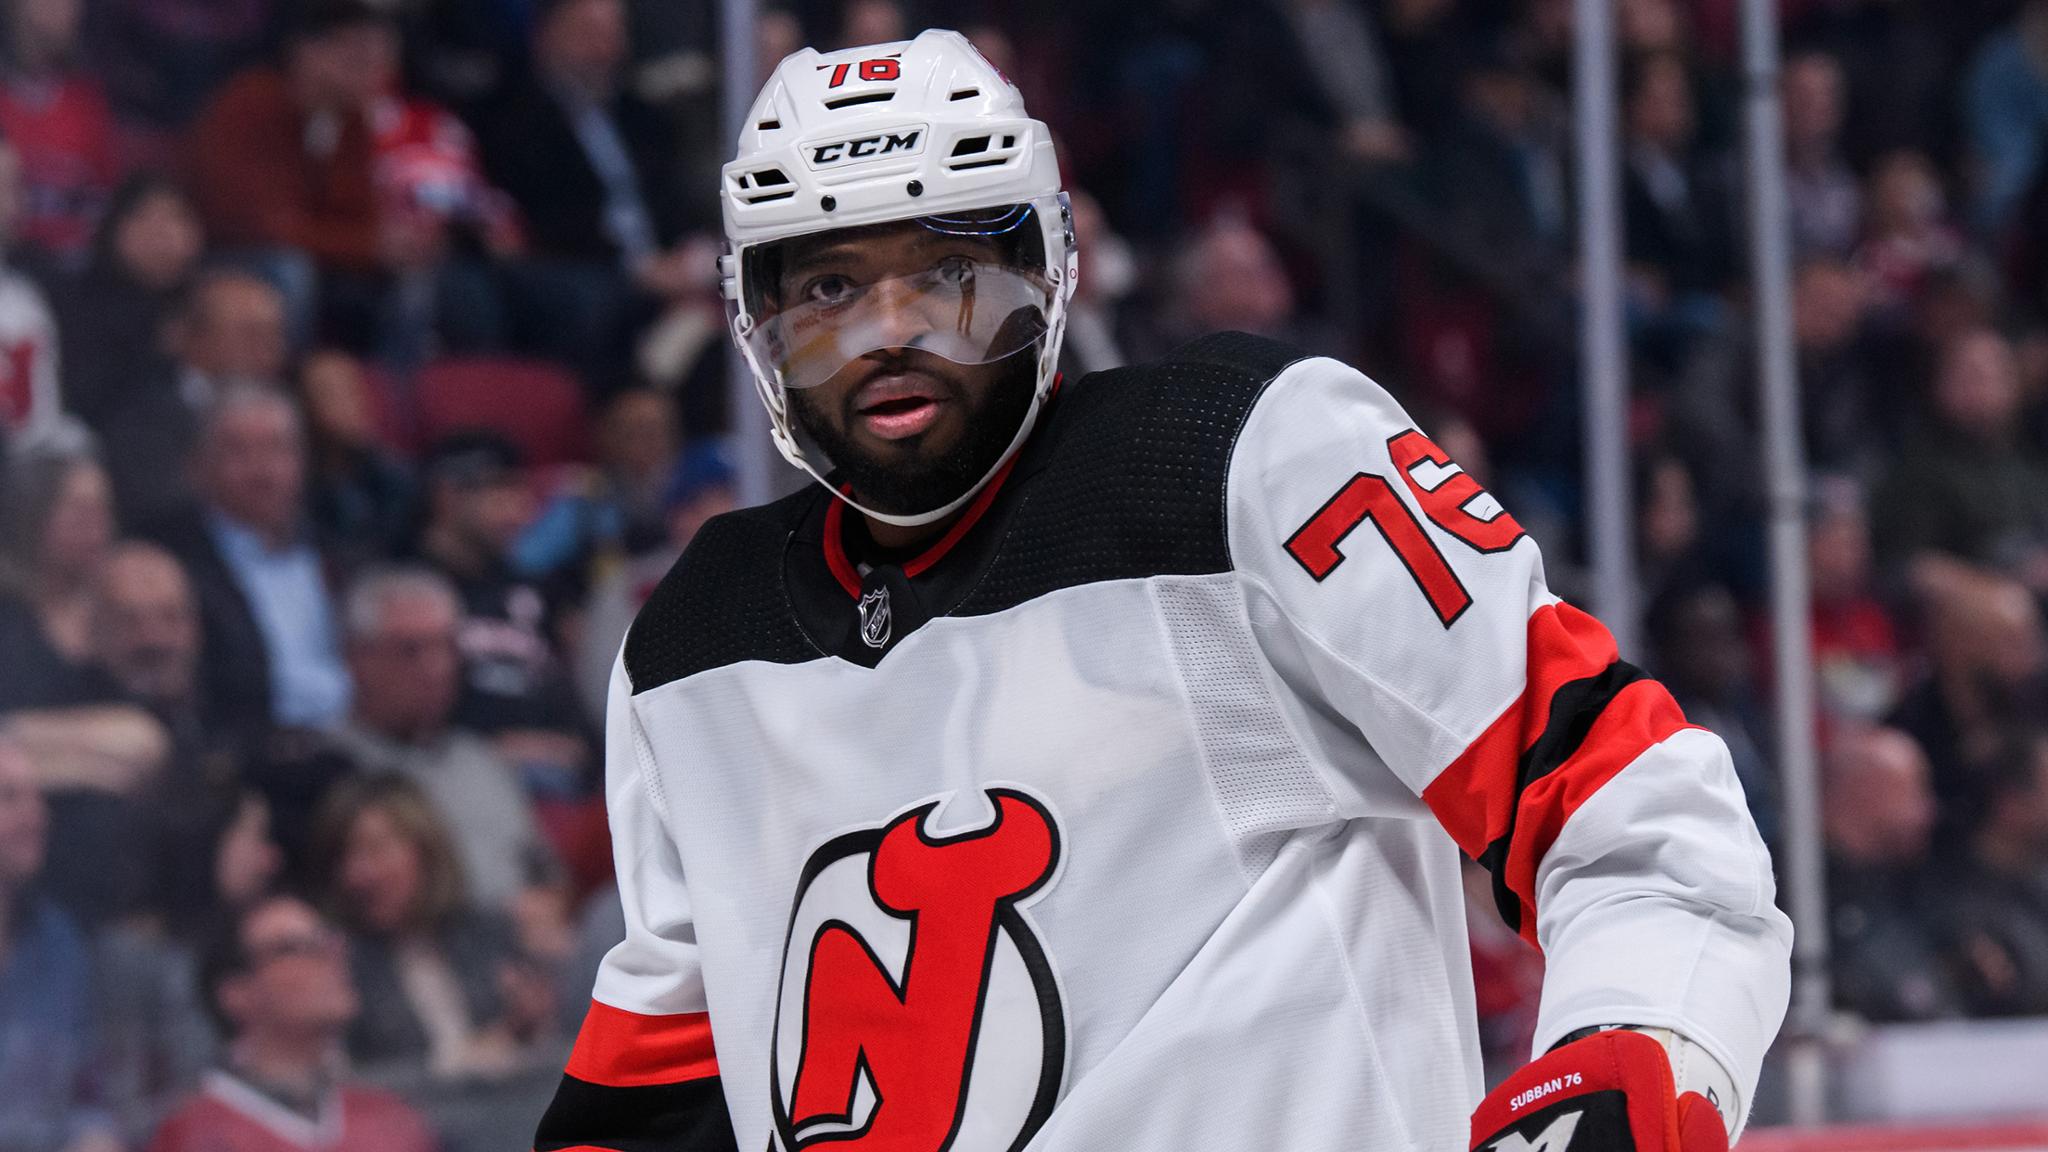 P.K. Subban should be defined by what he did for others